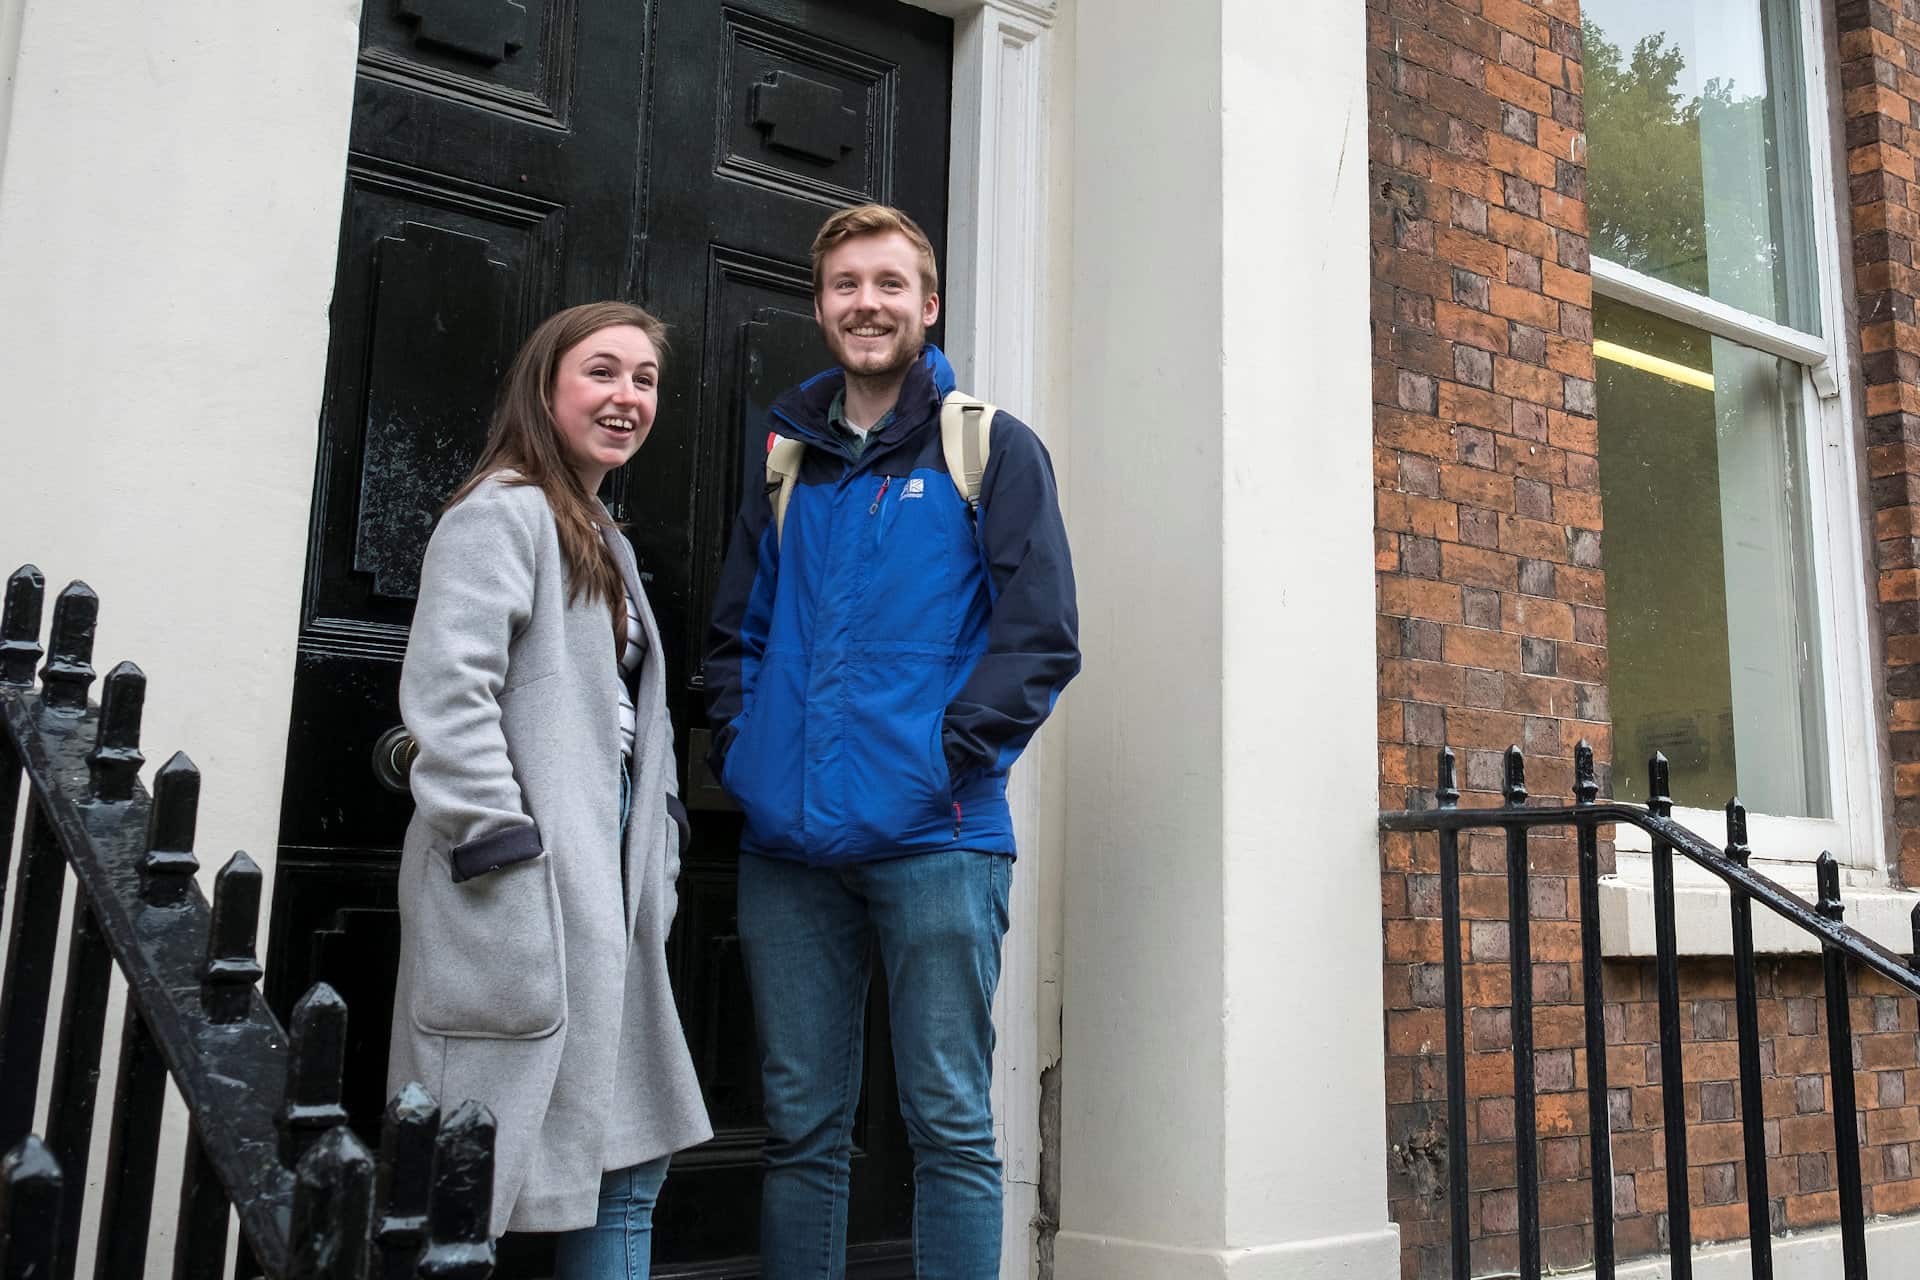 Students stood on abercromby square building doorway